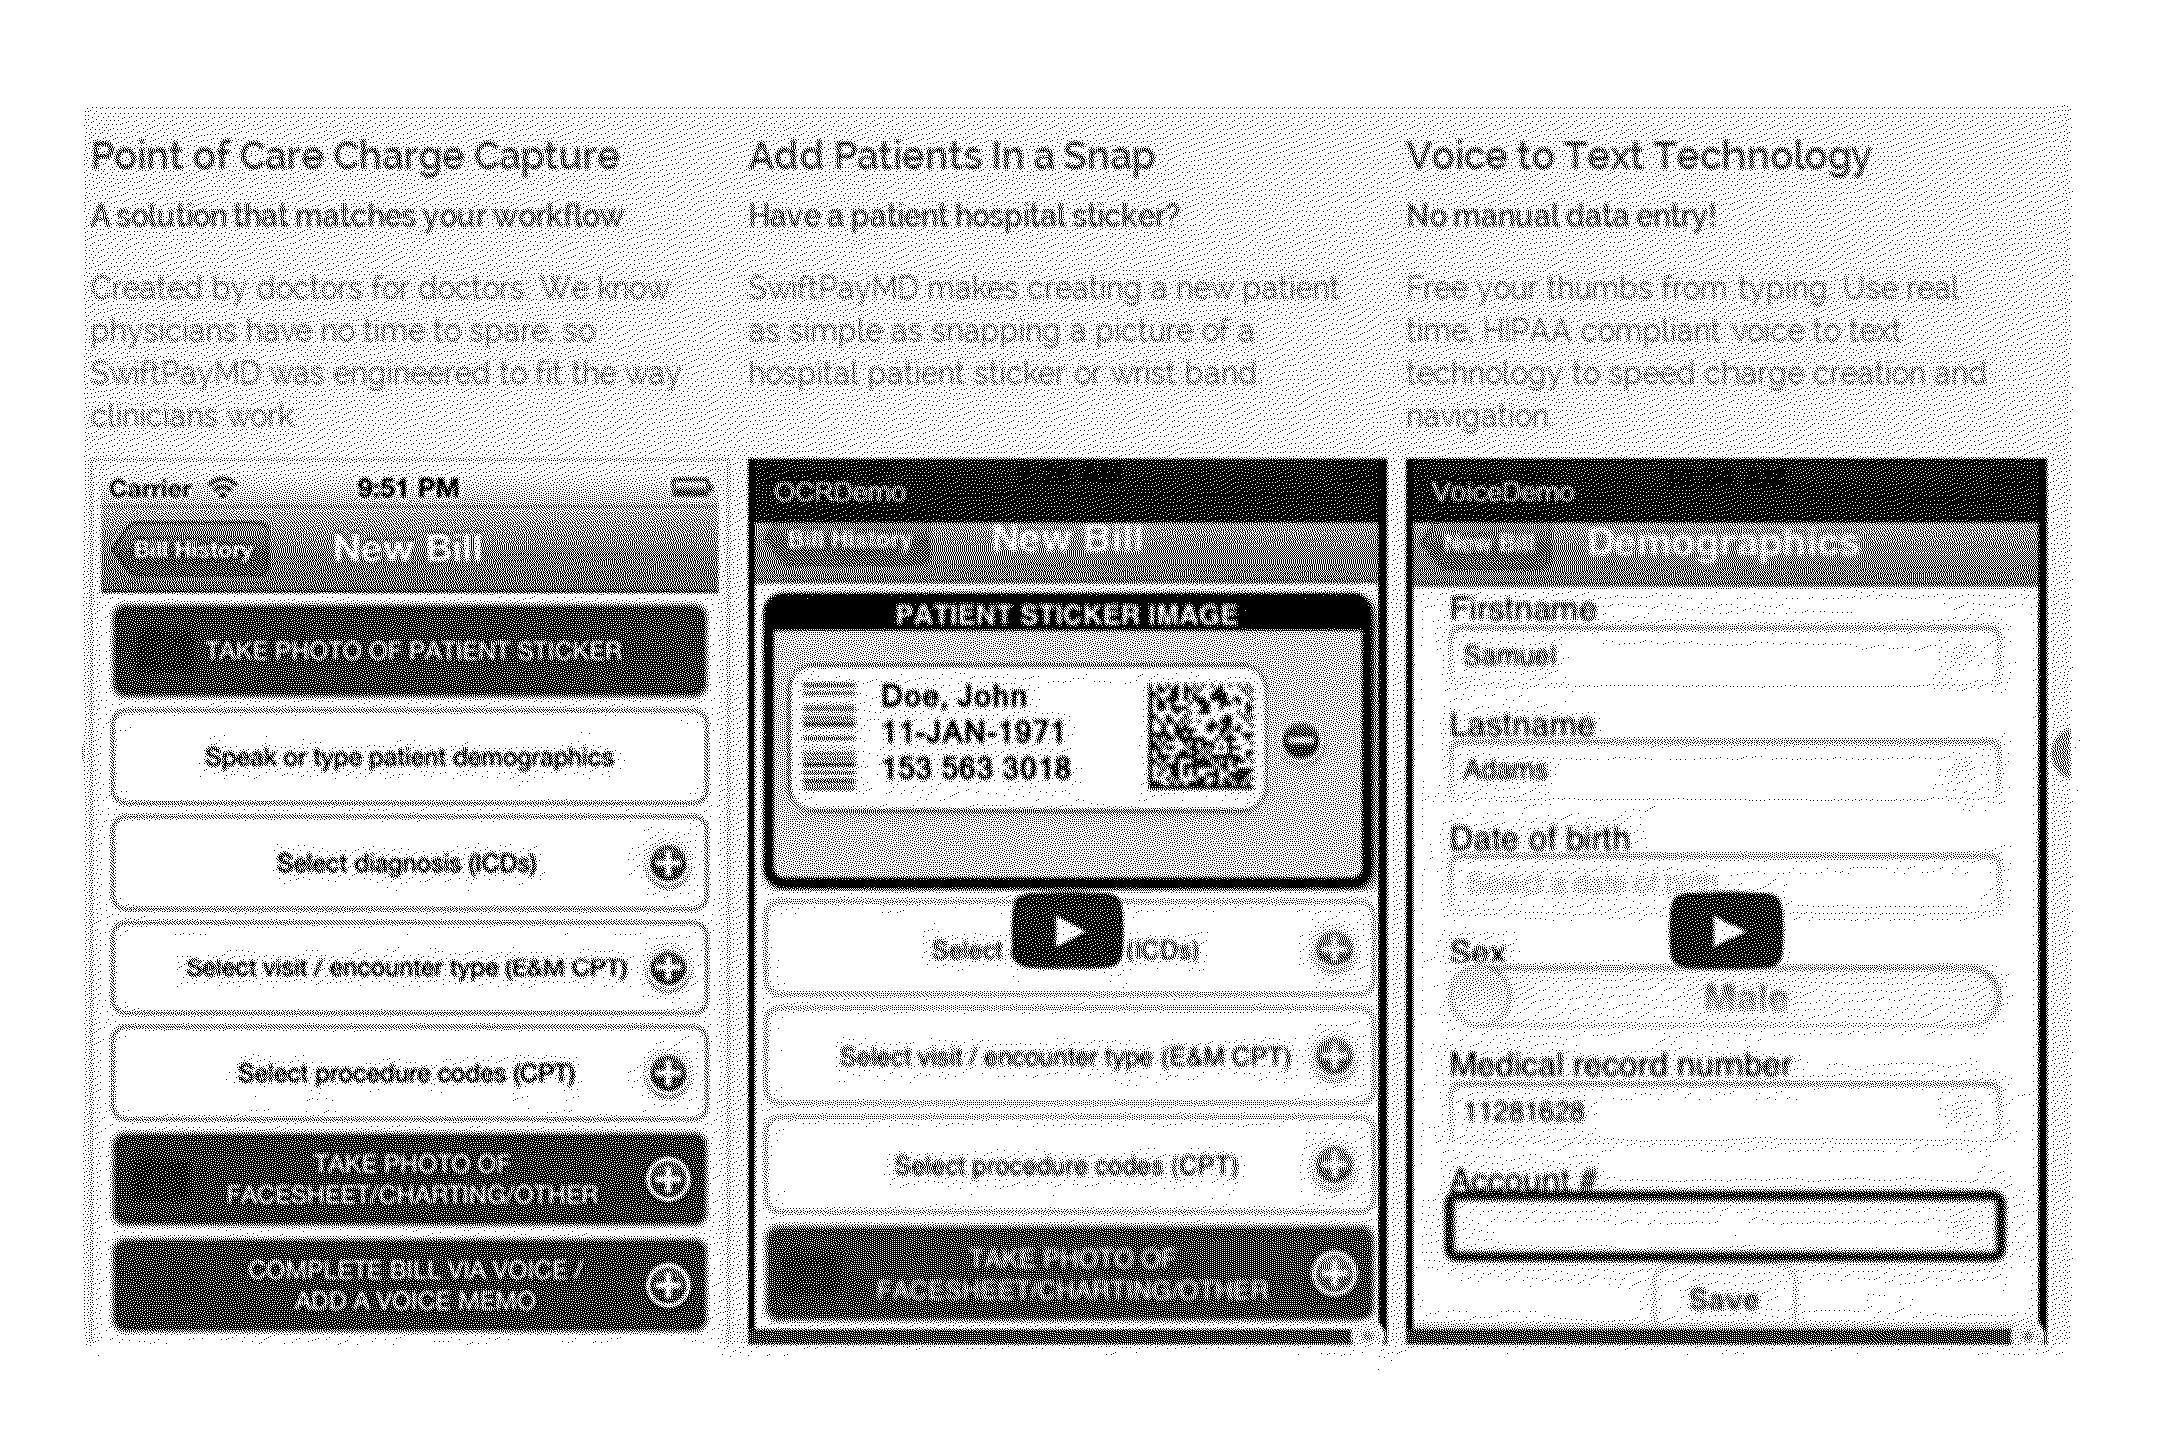 Protected health information voice data and / or transcript of voice data capture, processing and submission